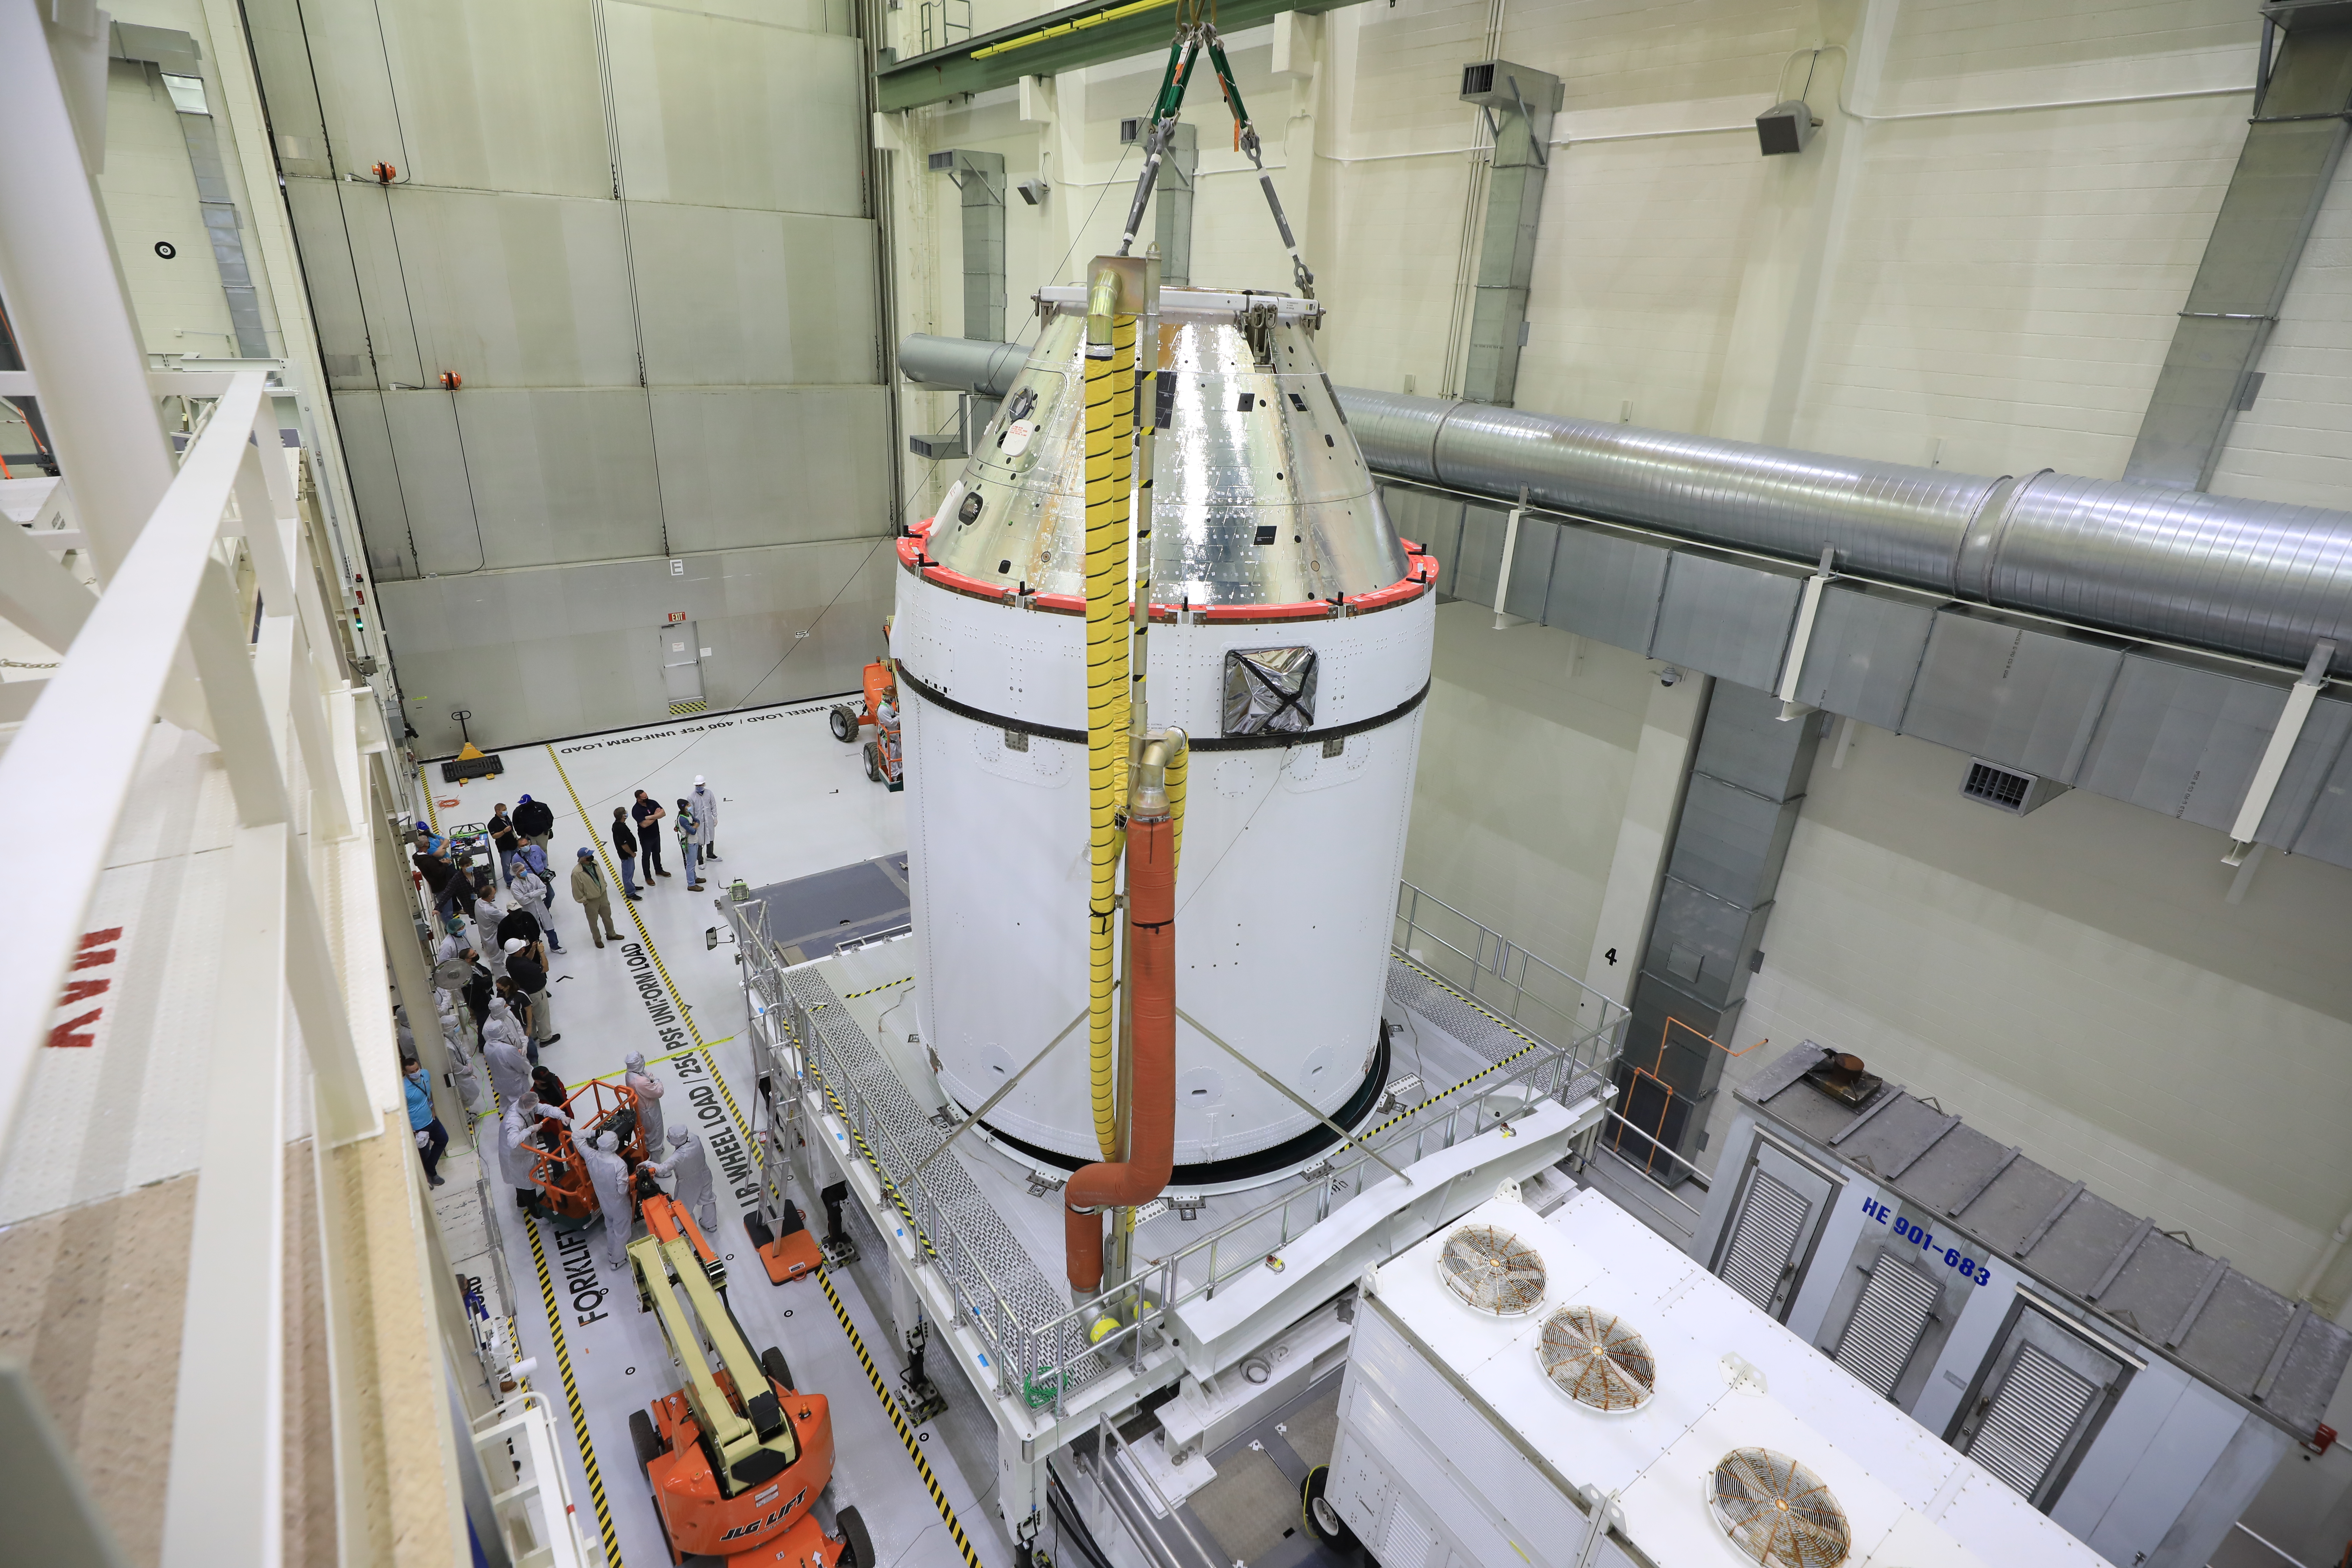 The Orion capsule being readied for transport